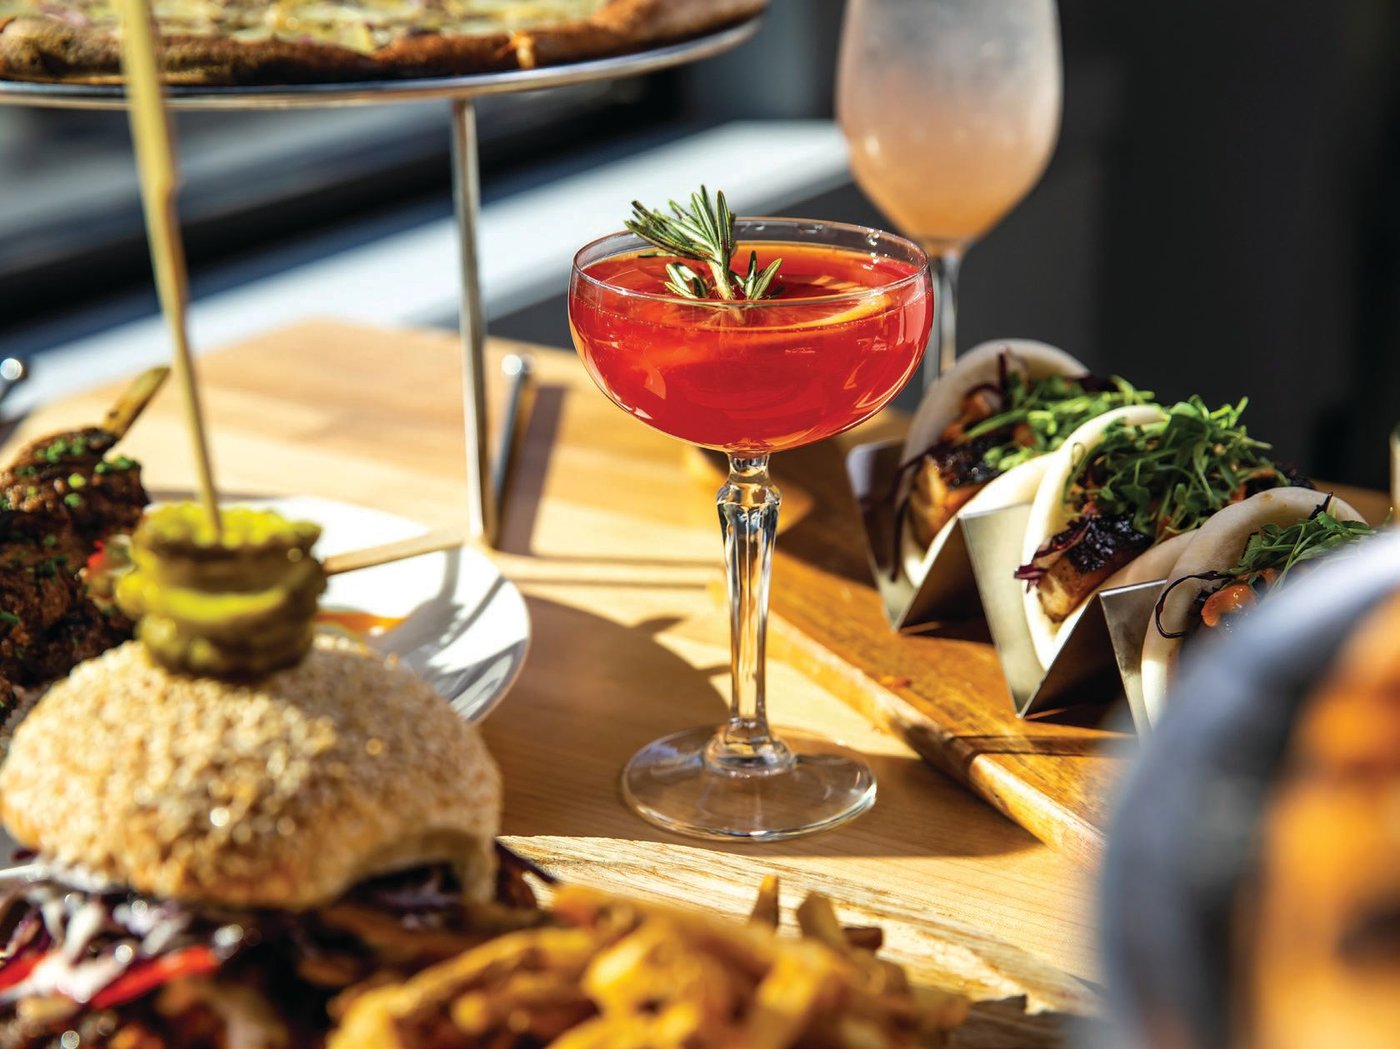 A variety of plates from Stove and Tap surround one of its specialty cocktails. PHOTO BY EDDY MARENCO